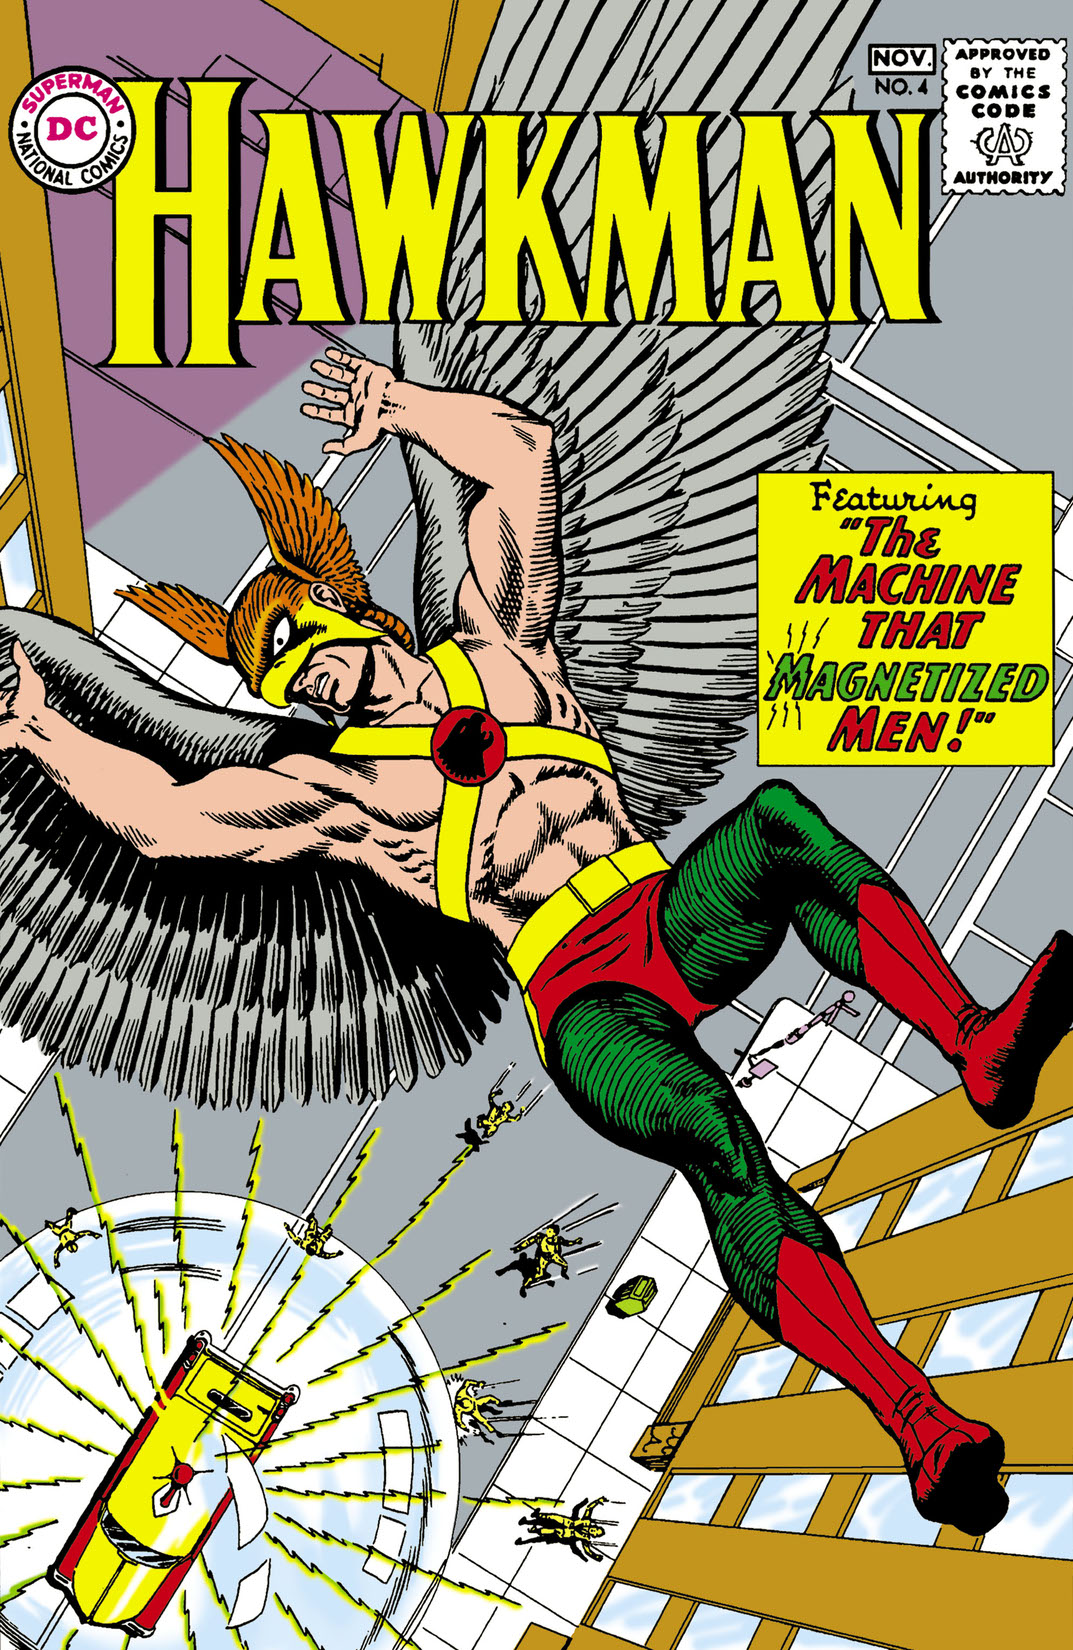 Hawkman (1964-) #4 preview images